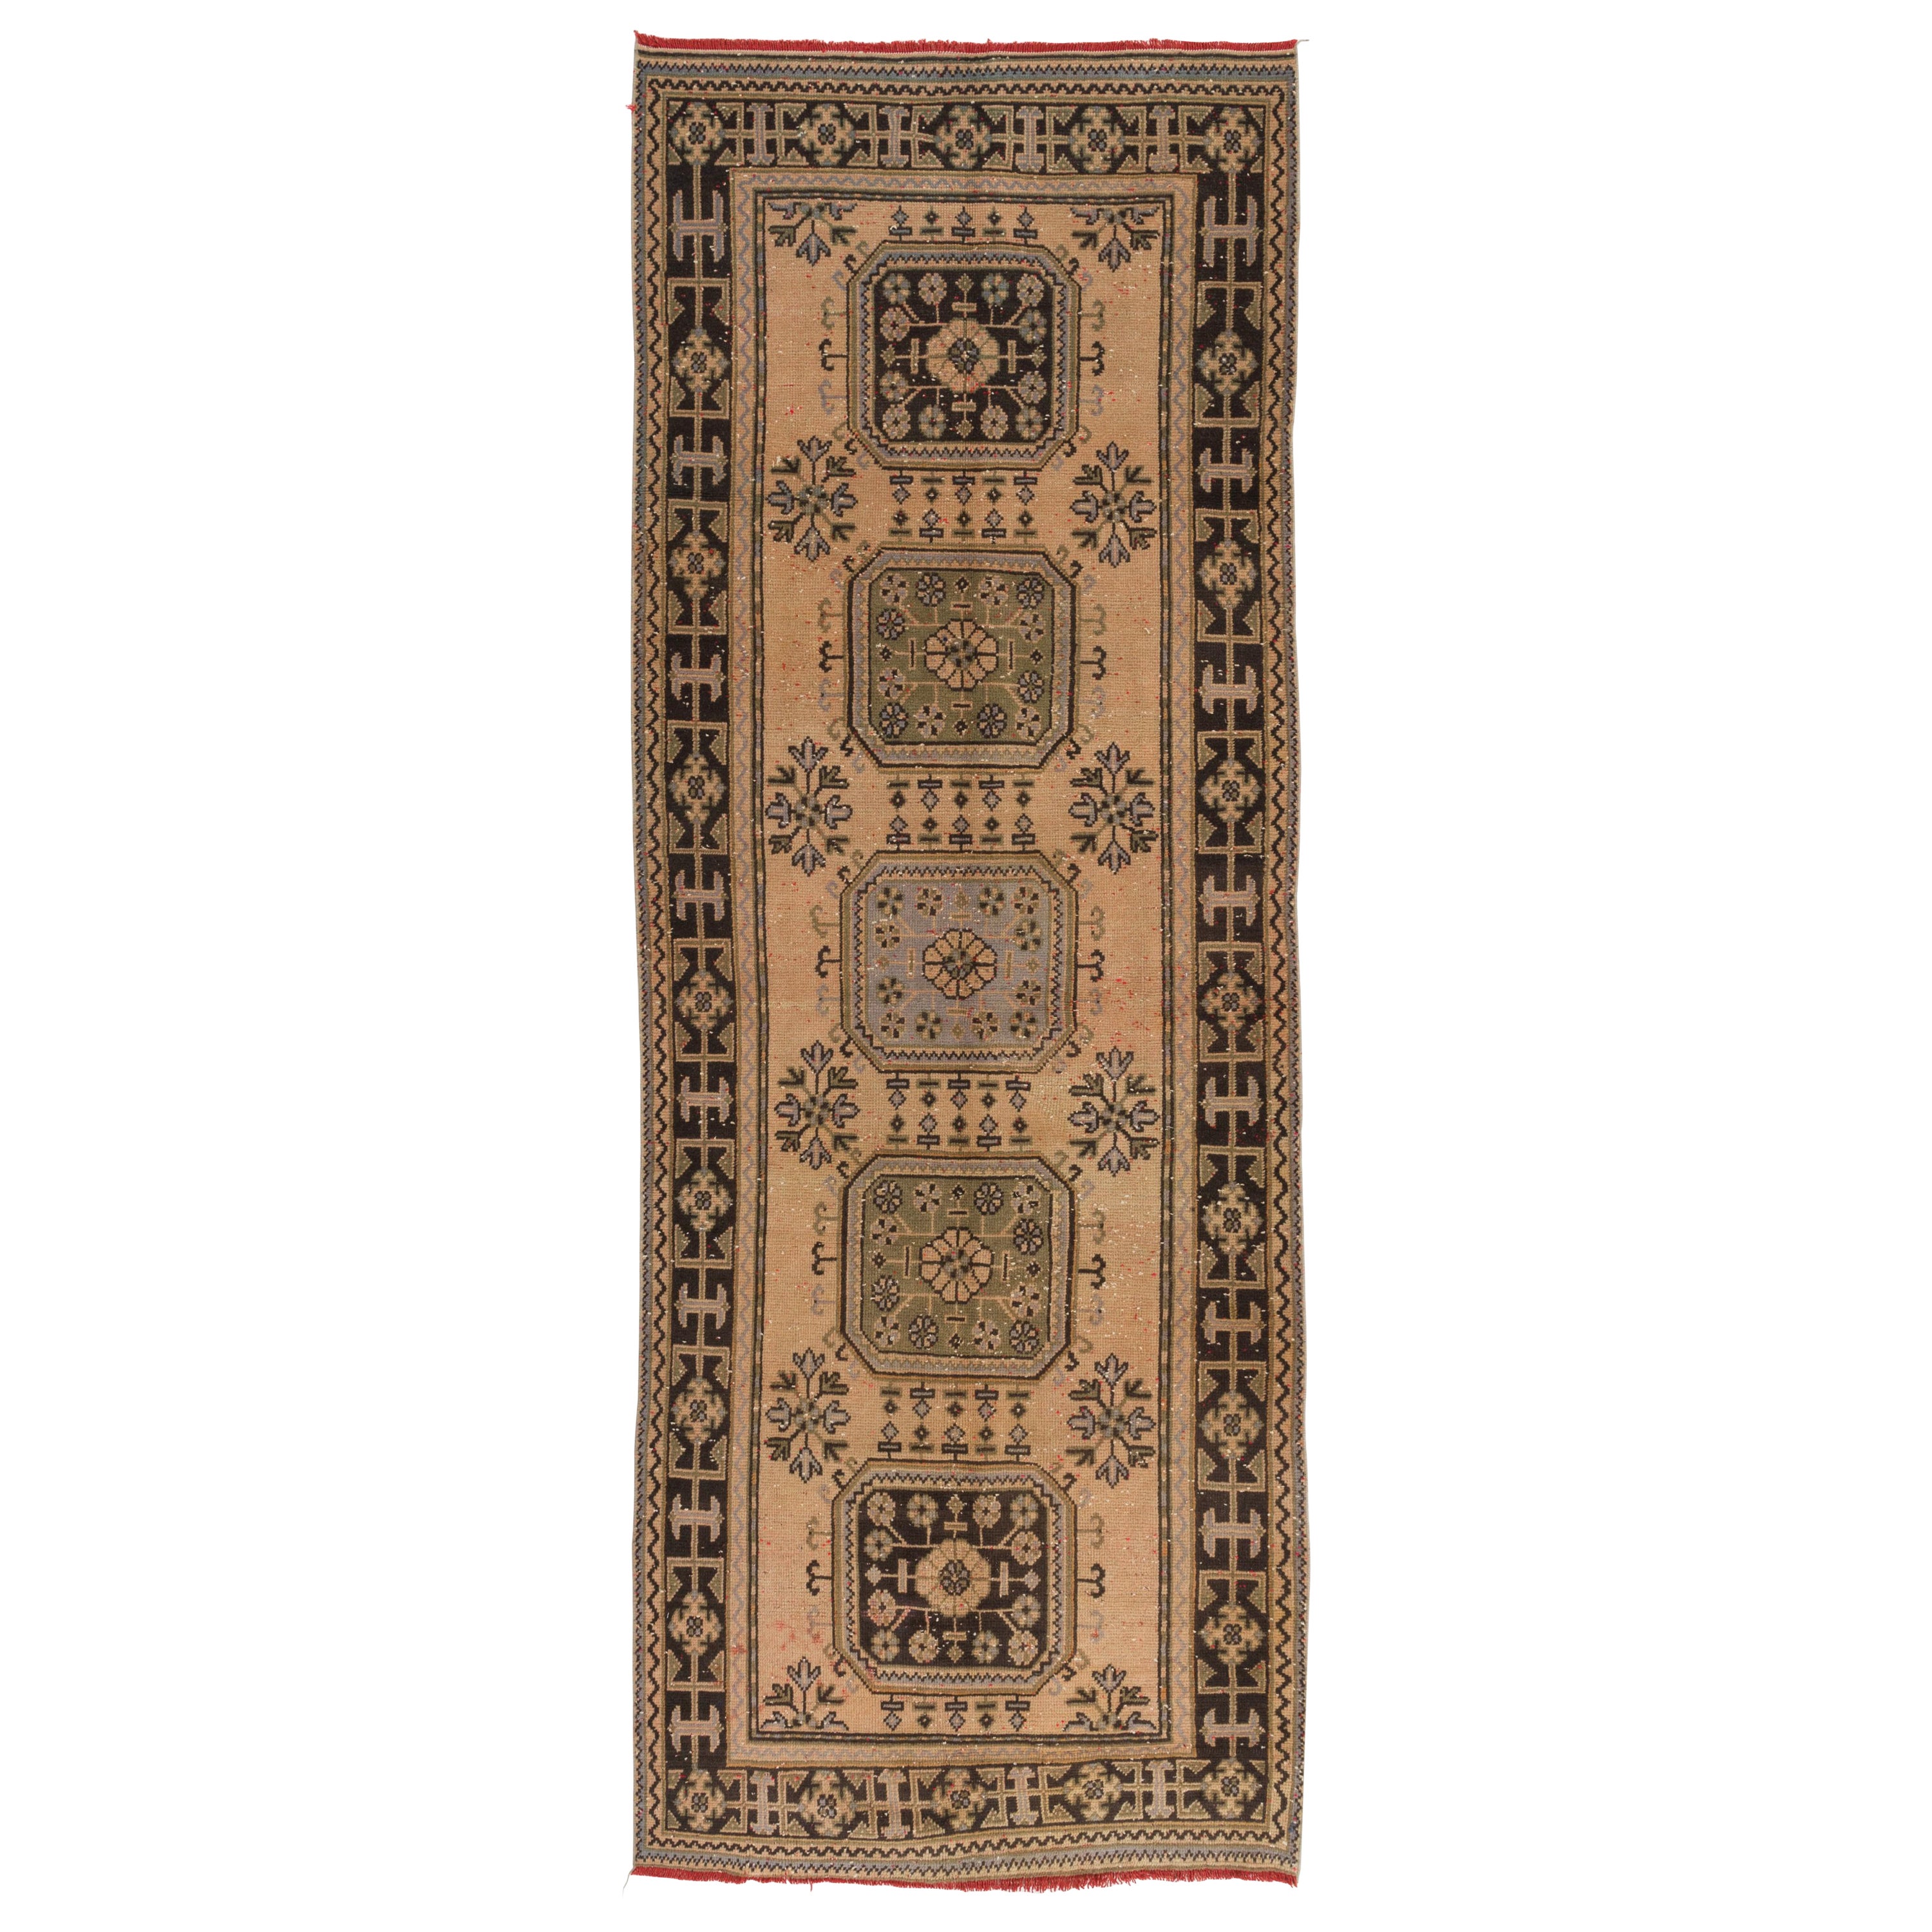 Vintage Wool Runner Rug from Turkey, Hand-Knotted Carpet for Hallway